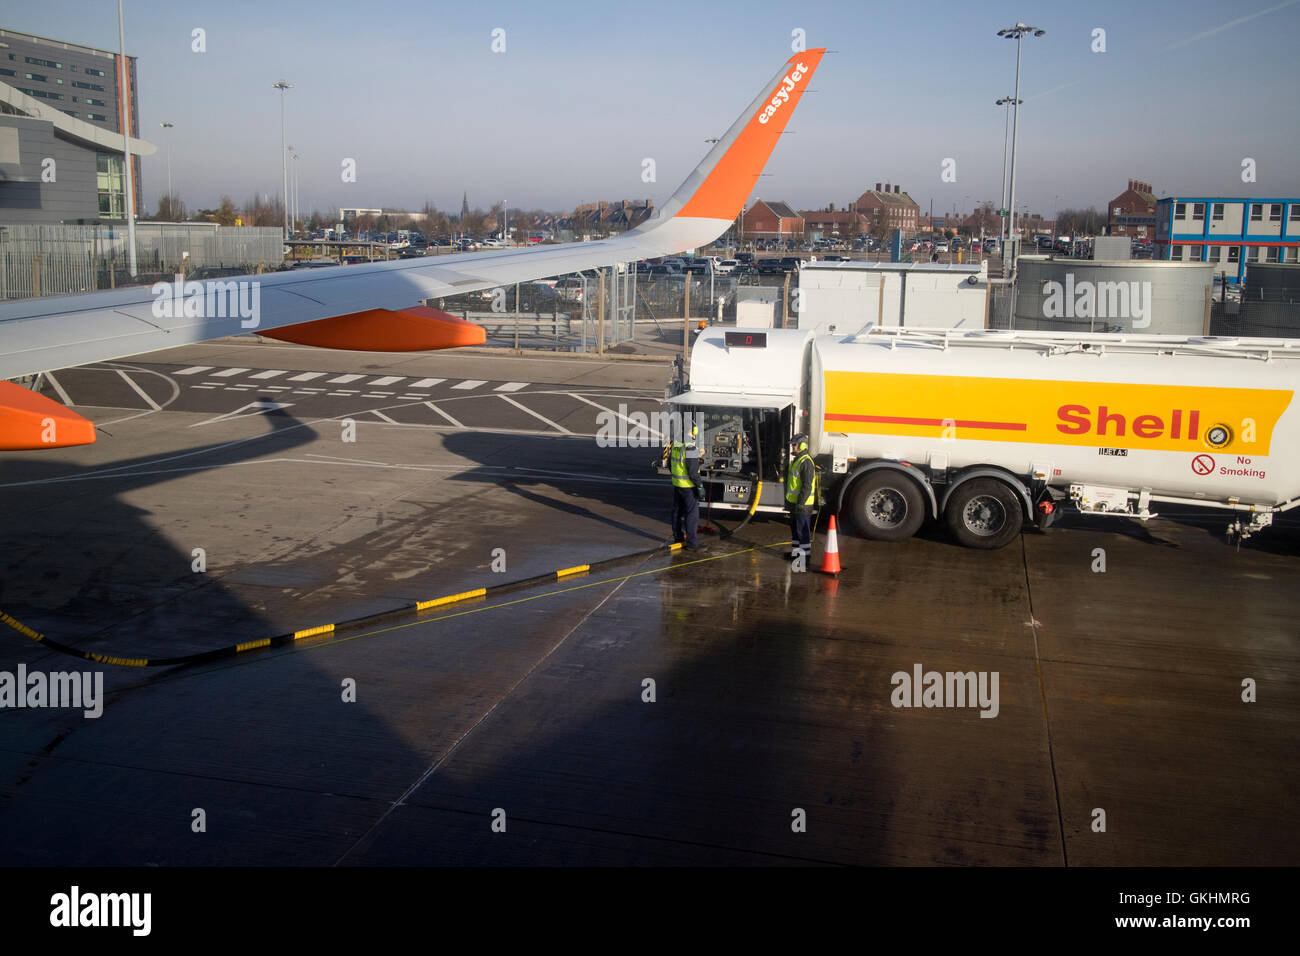 Shell oil jet-a1 refuelling tanker refuelling easyjet aircraft at liverpool john lennon airport in the uk Stock Photo